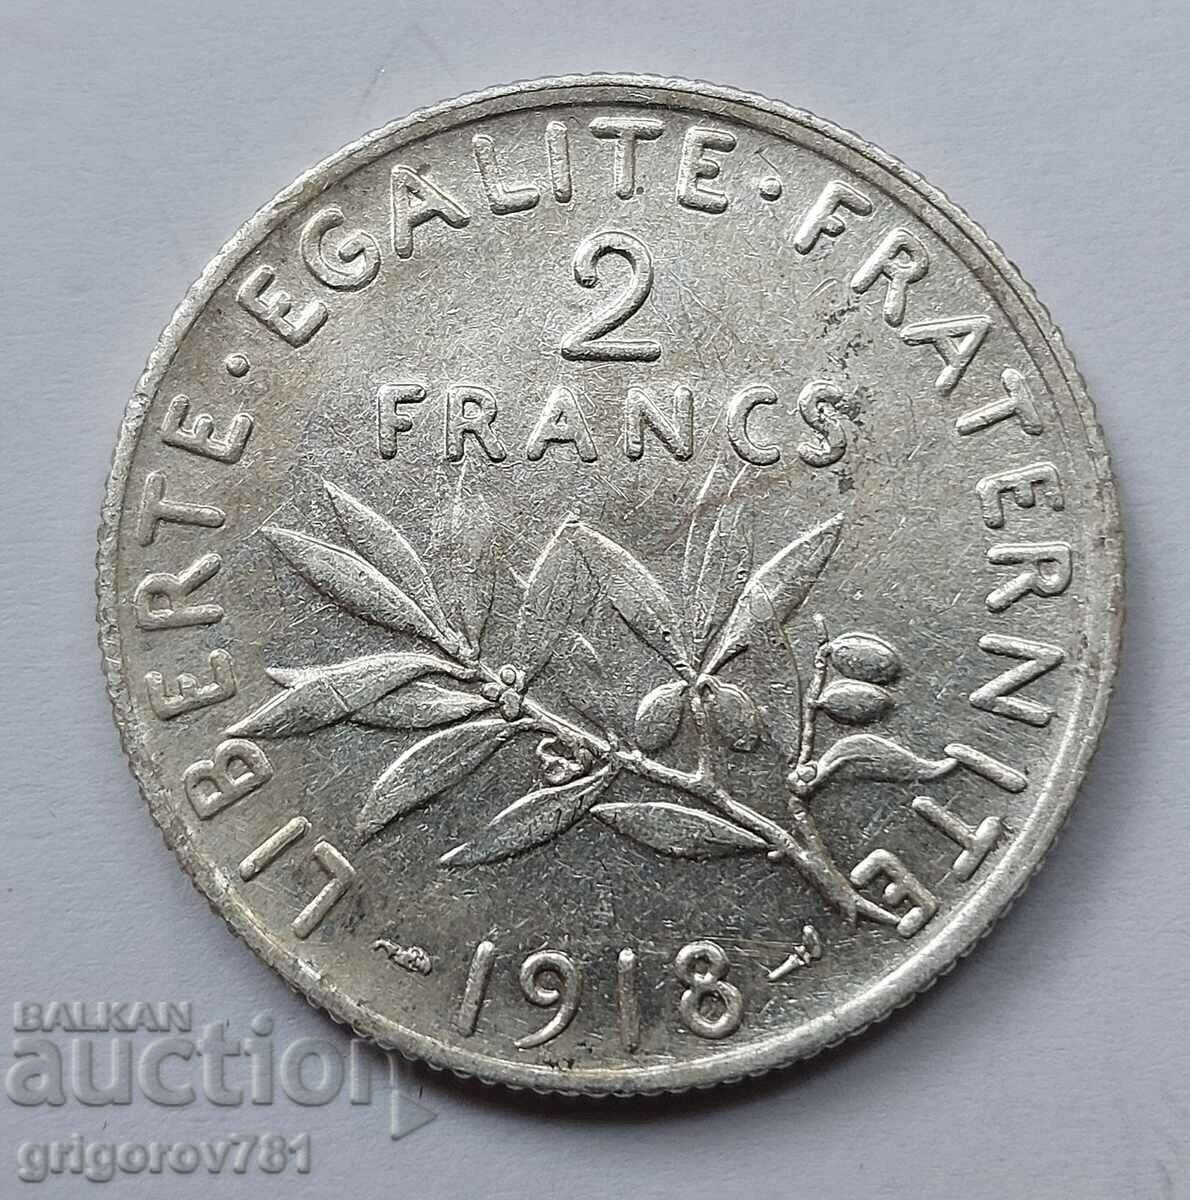 2 Francs Silver France 1918 - Silver Coin #137